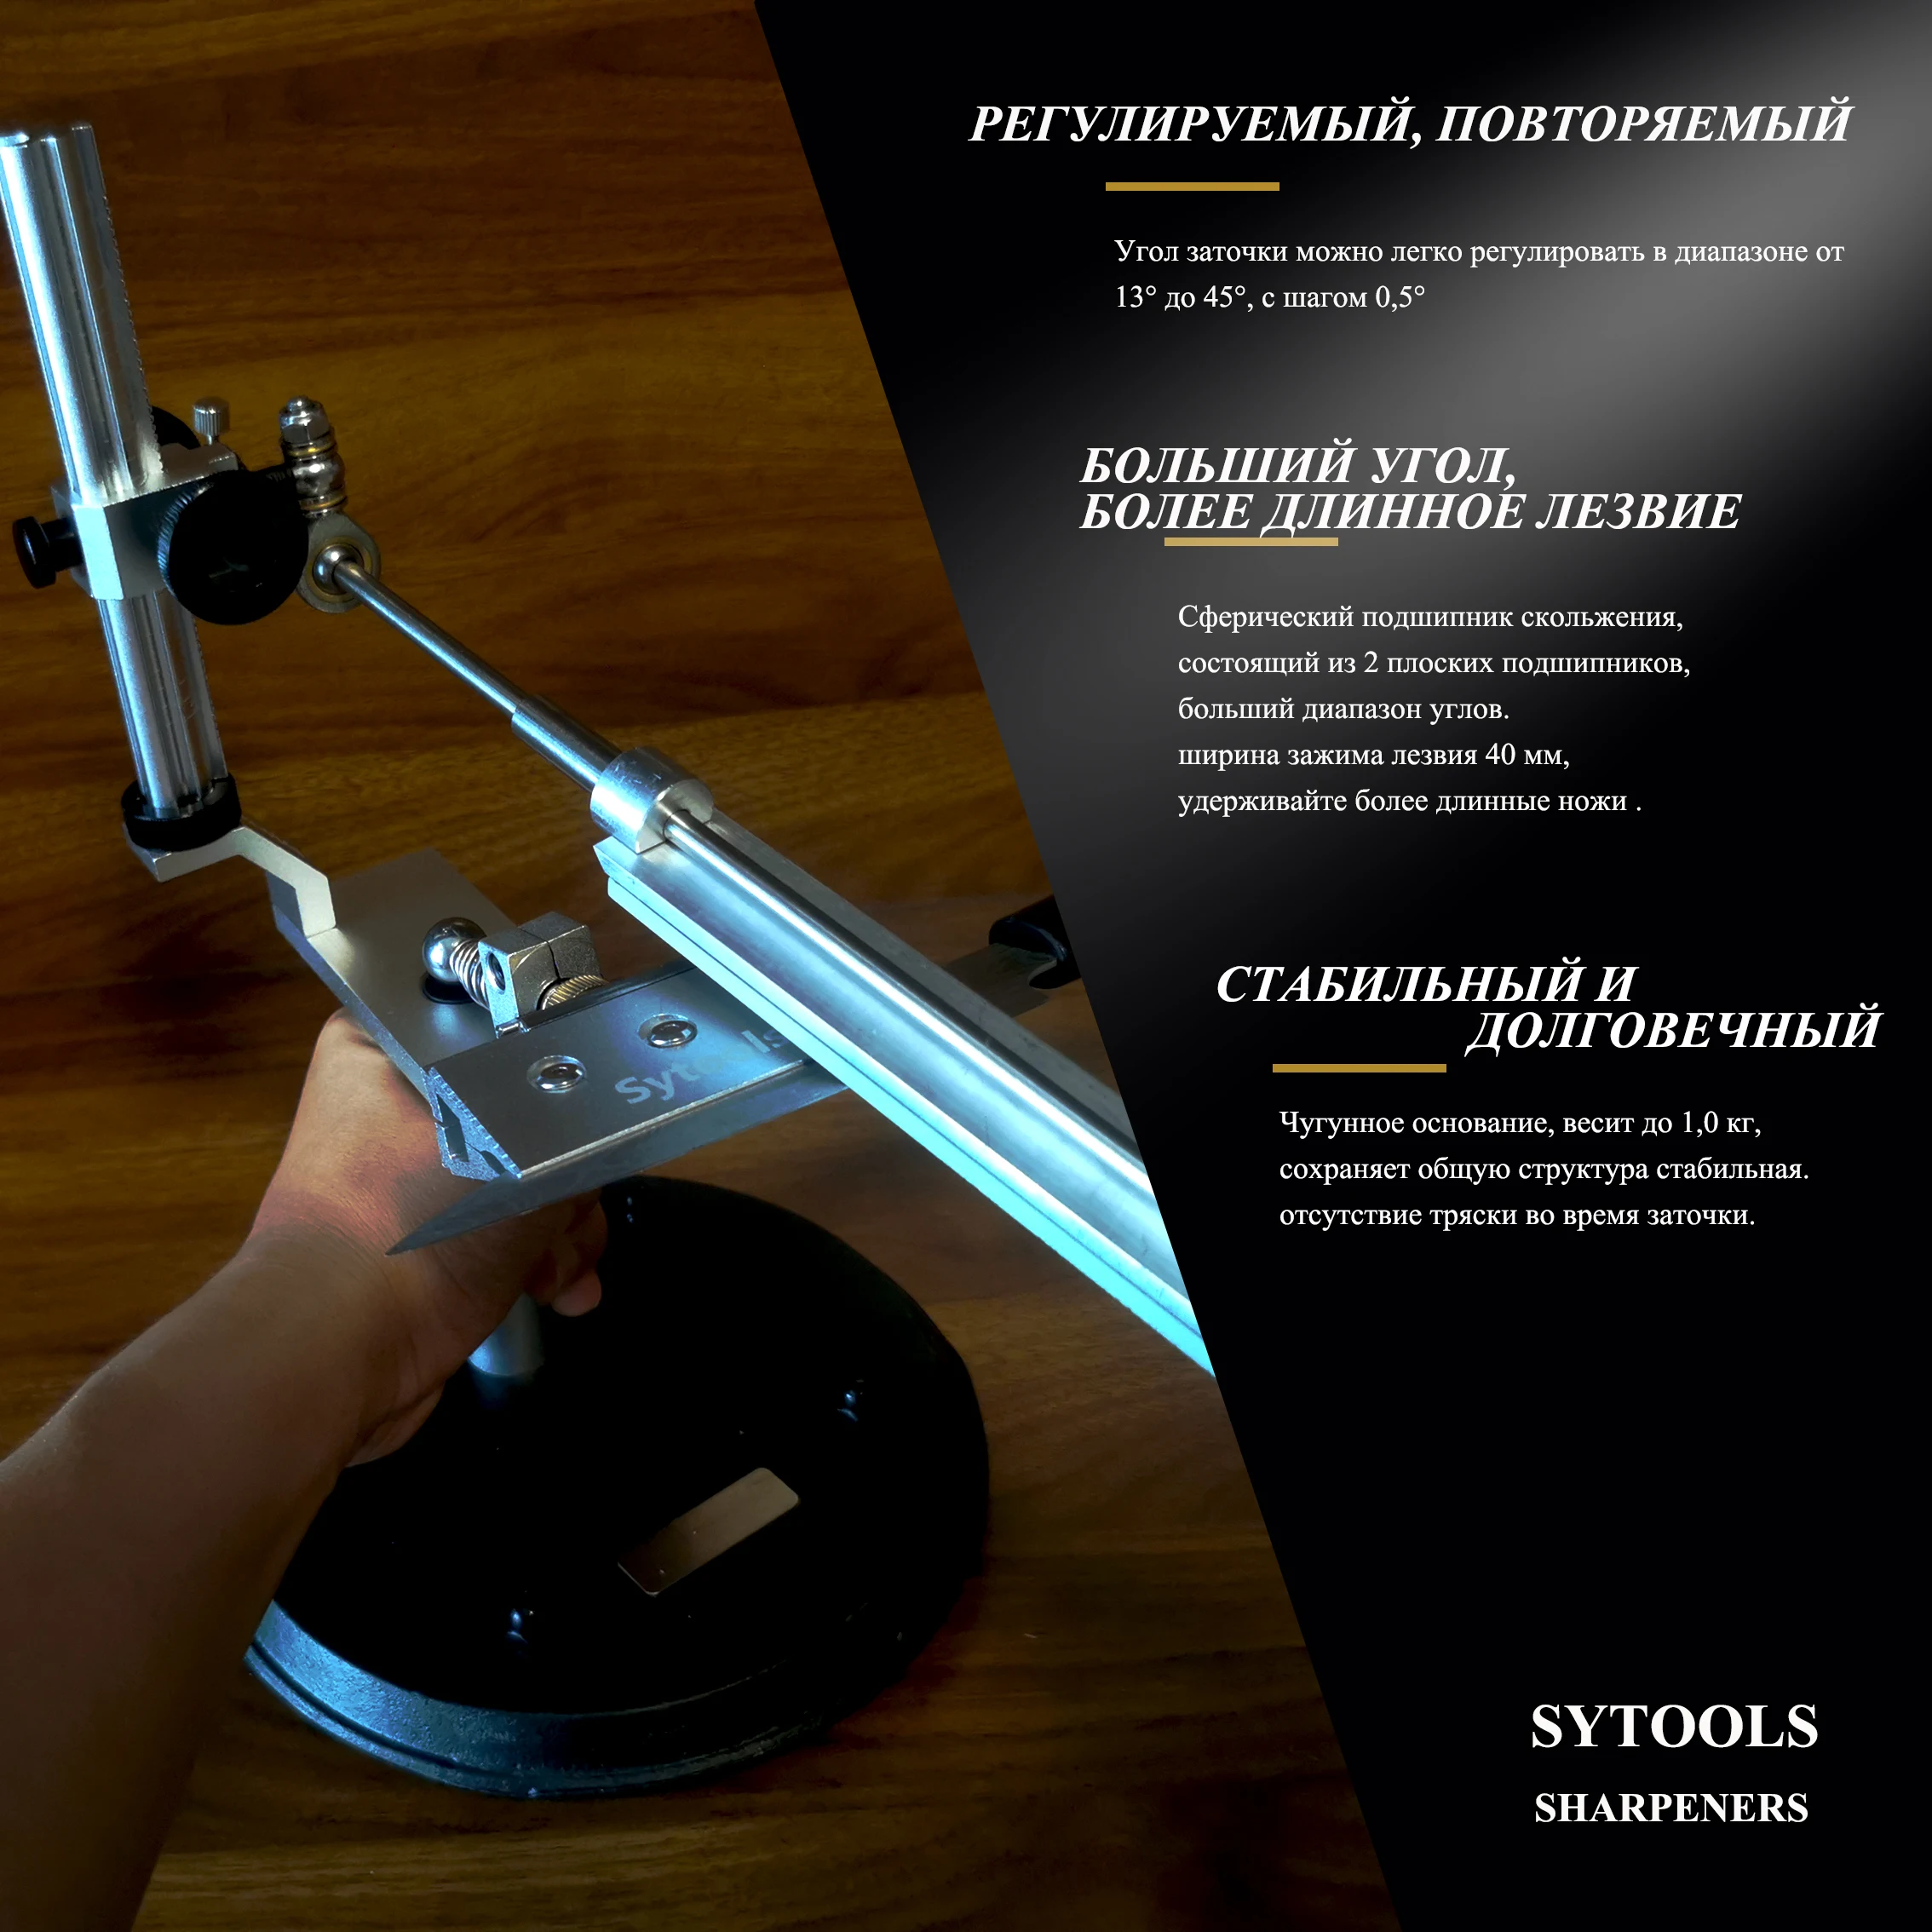 Sy Tools Beast Professional Knife Sharpener Sharpening System With Angle  Adjustment Setting Magnifying Glass Kitchen/Hunting/Outdoor/Chef Knives  Tools